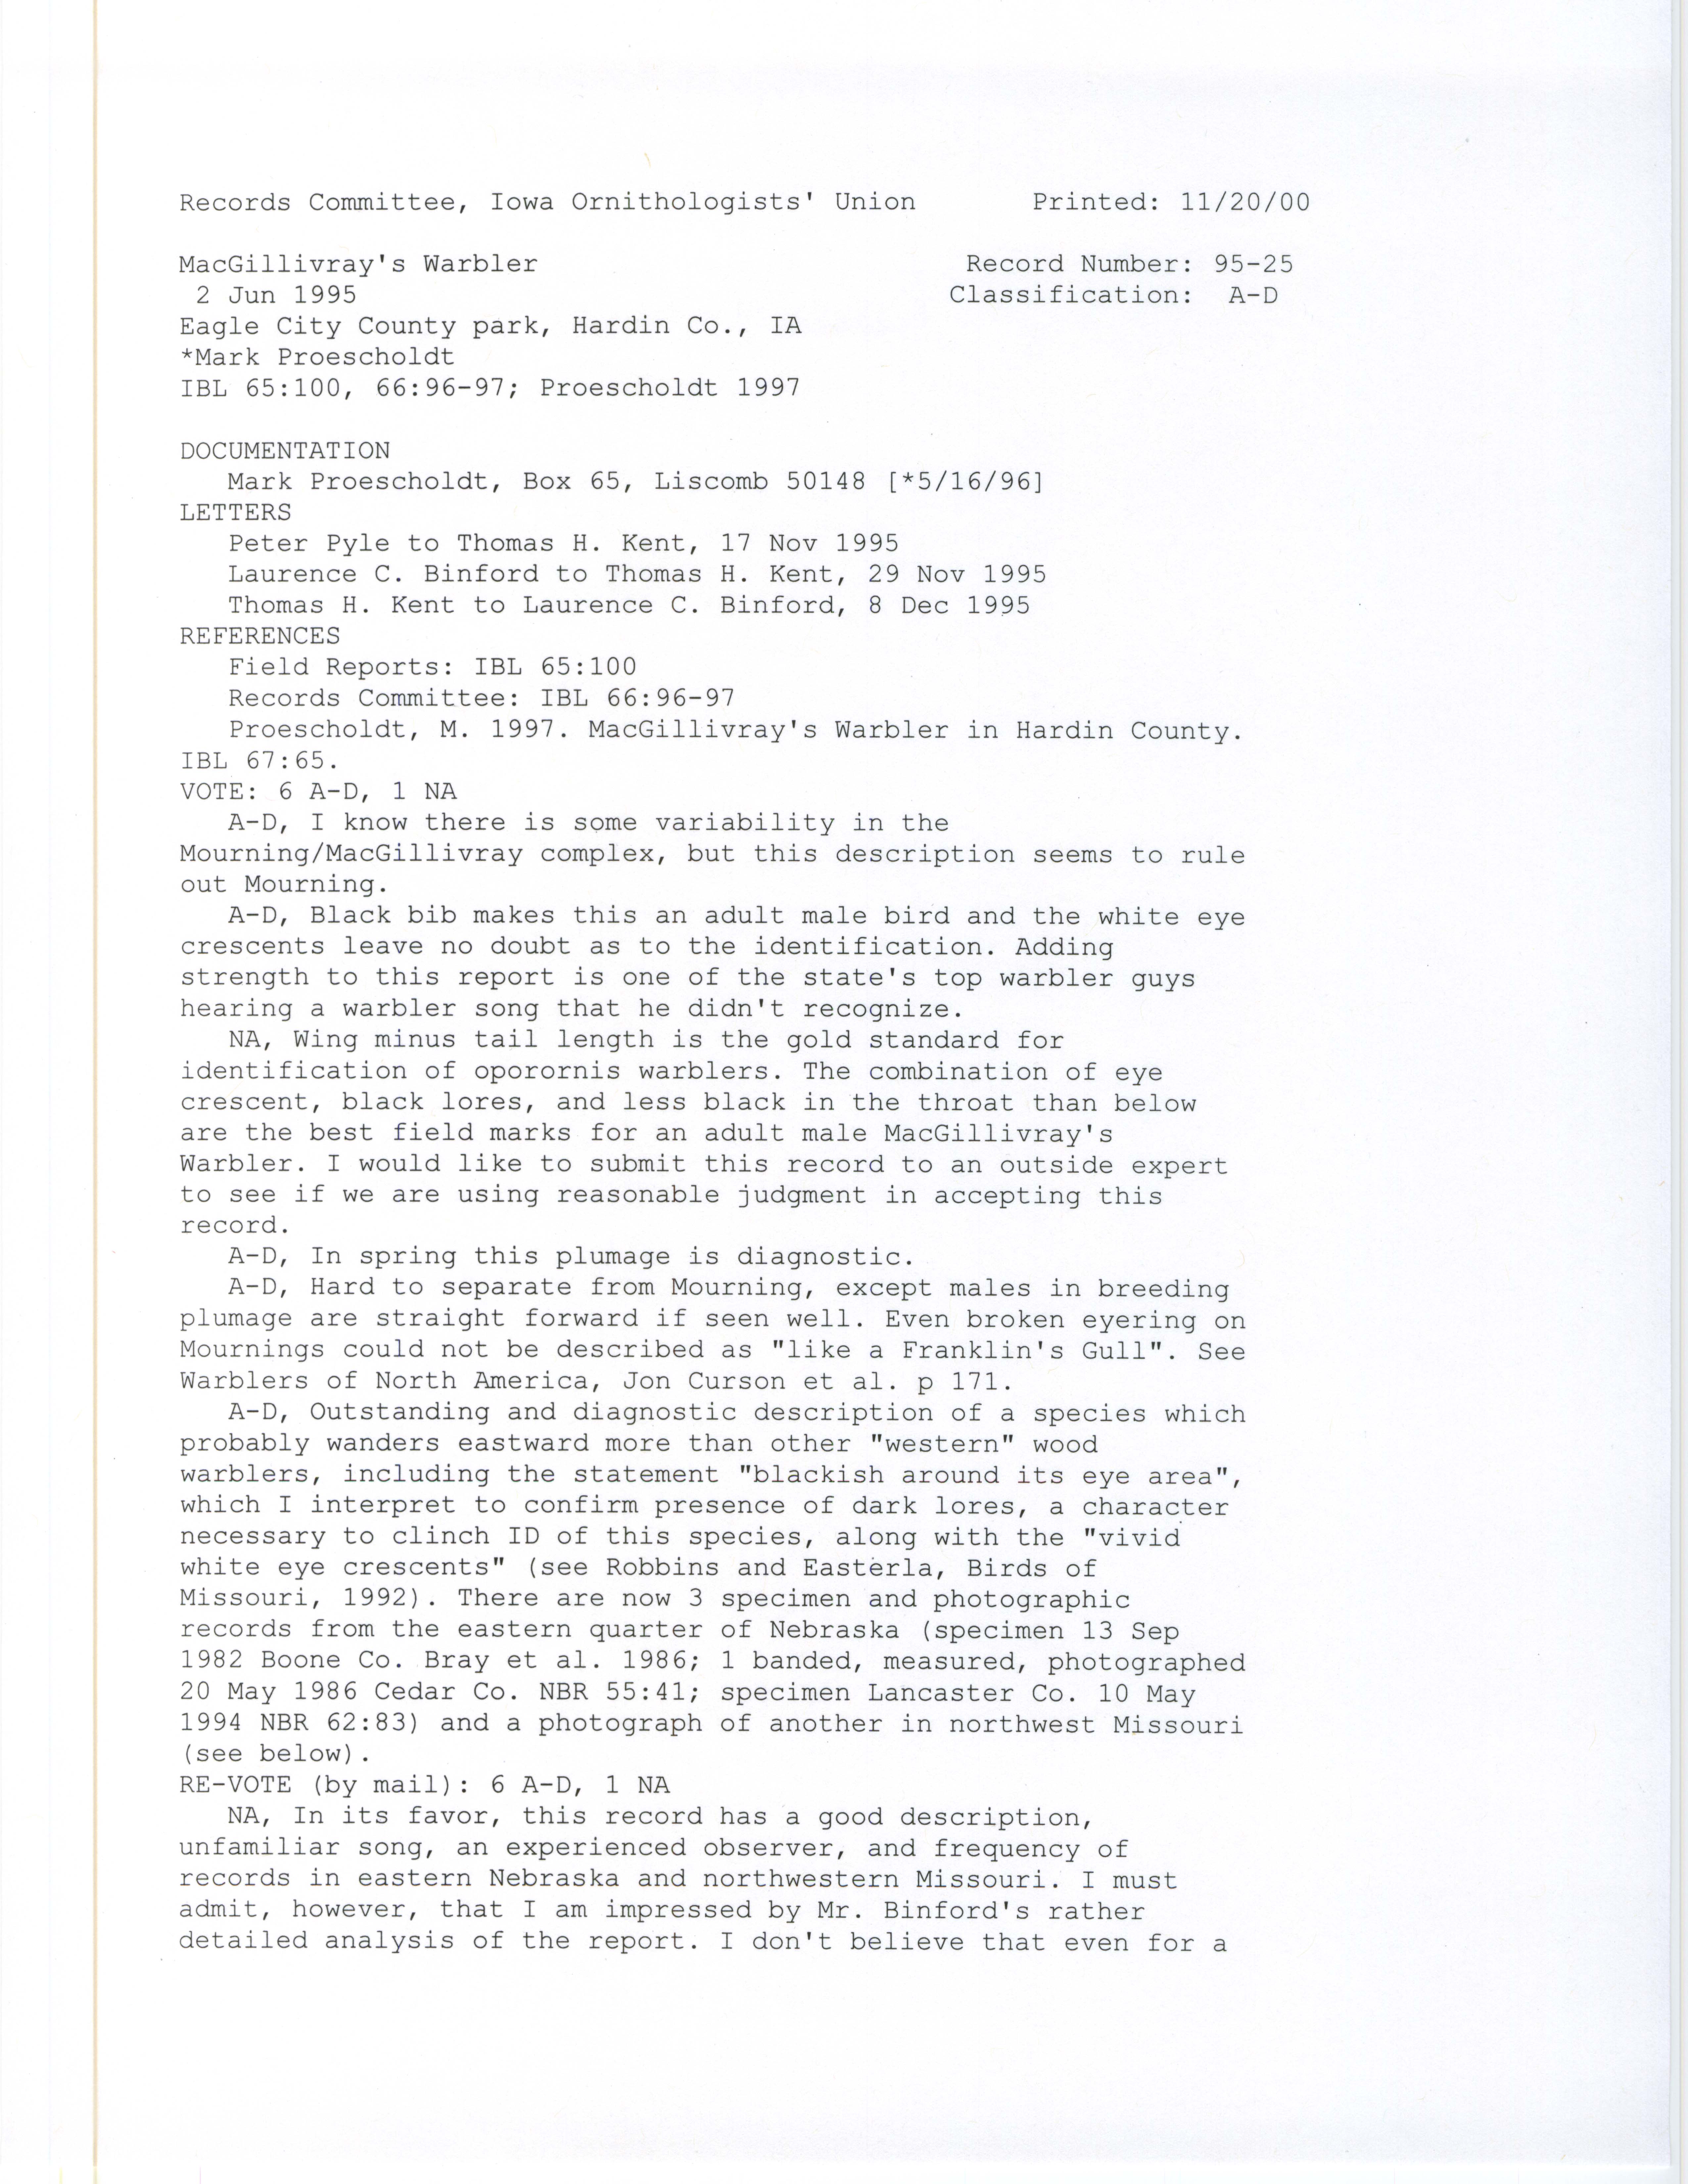 Records Committee review for rare bird sighting for MacGillivray's Warbler at Eagle City County Park, 1995